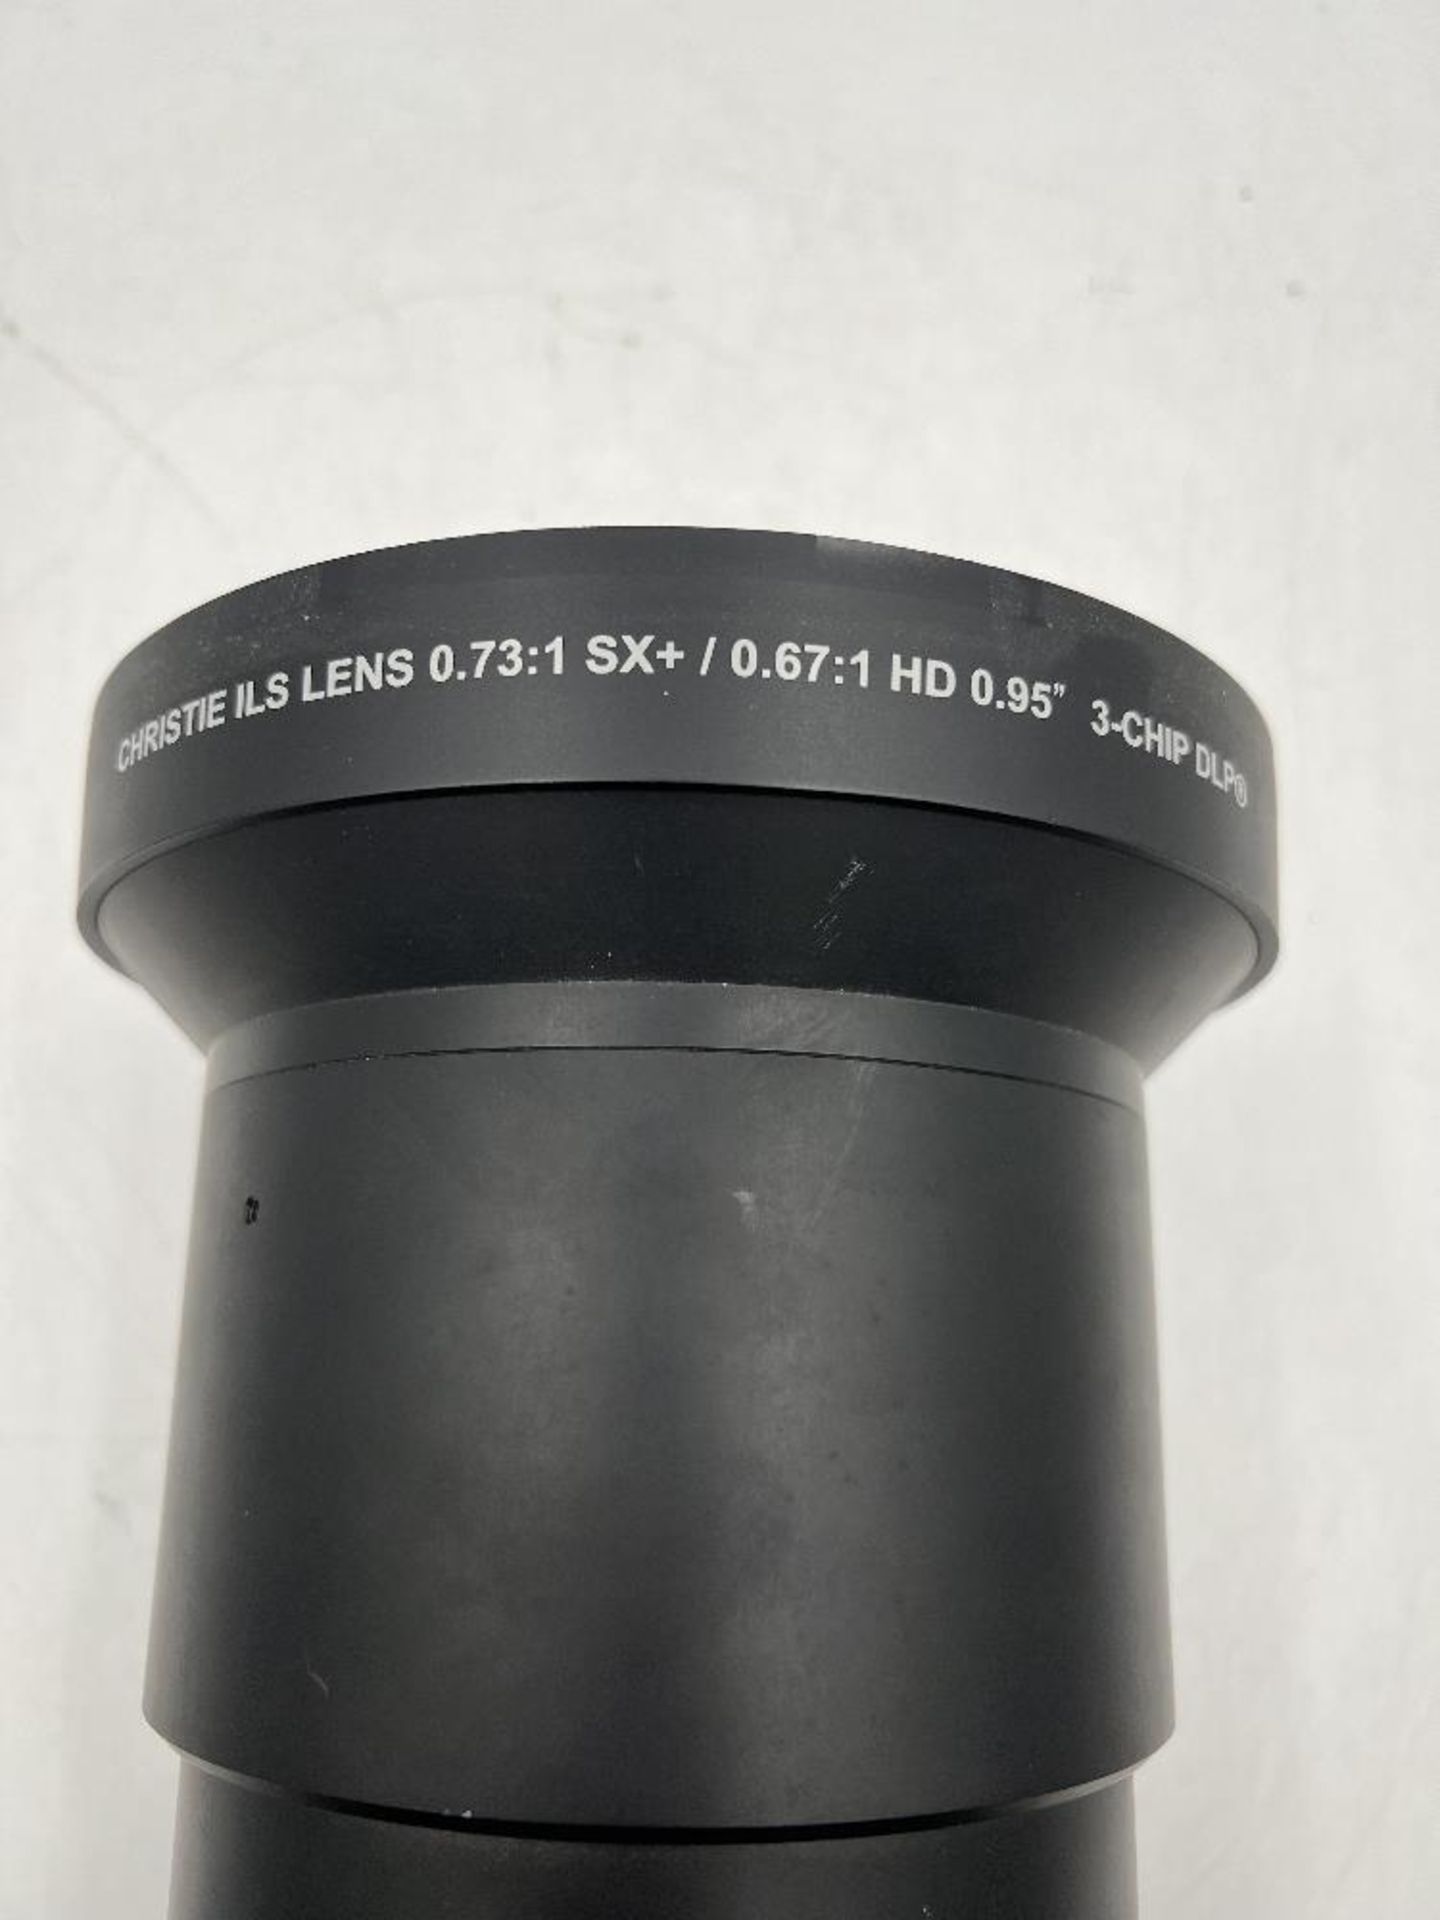 Christie ILS Lens 0.67 With Protective Flight Case - Image 4 of 6